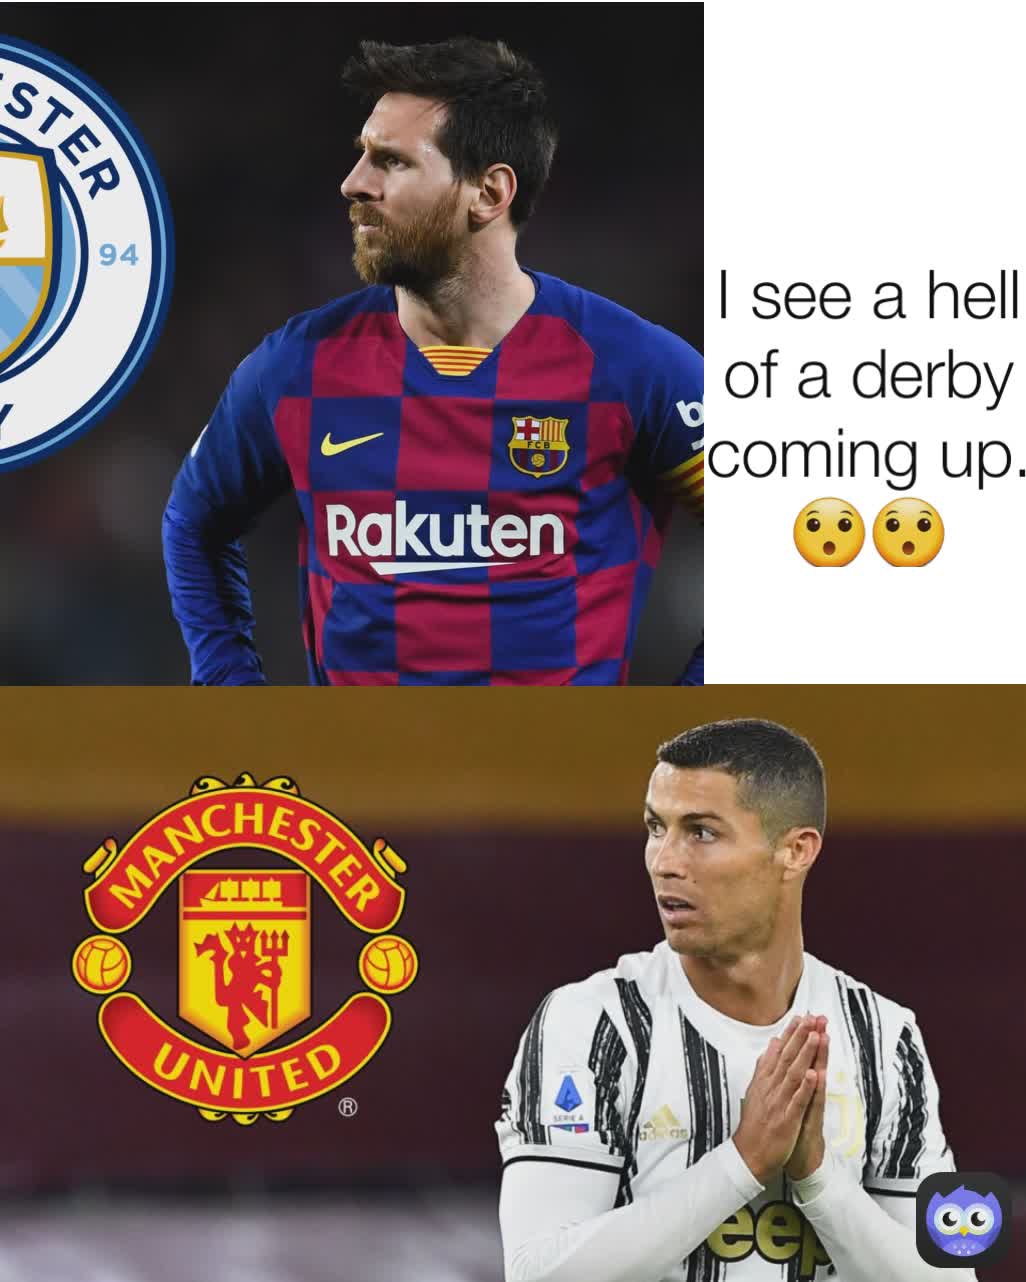 I see a hell of a derby coming up.😯😯